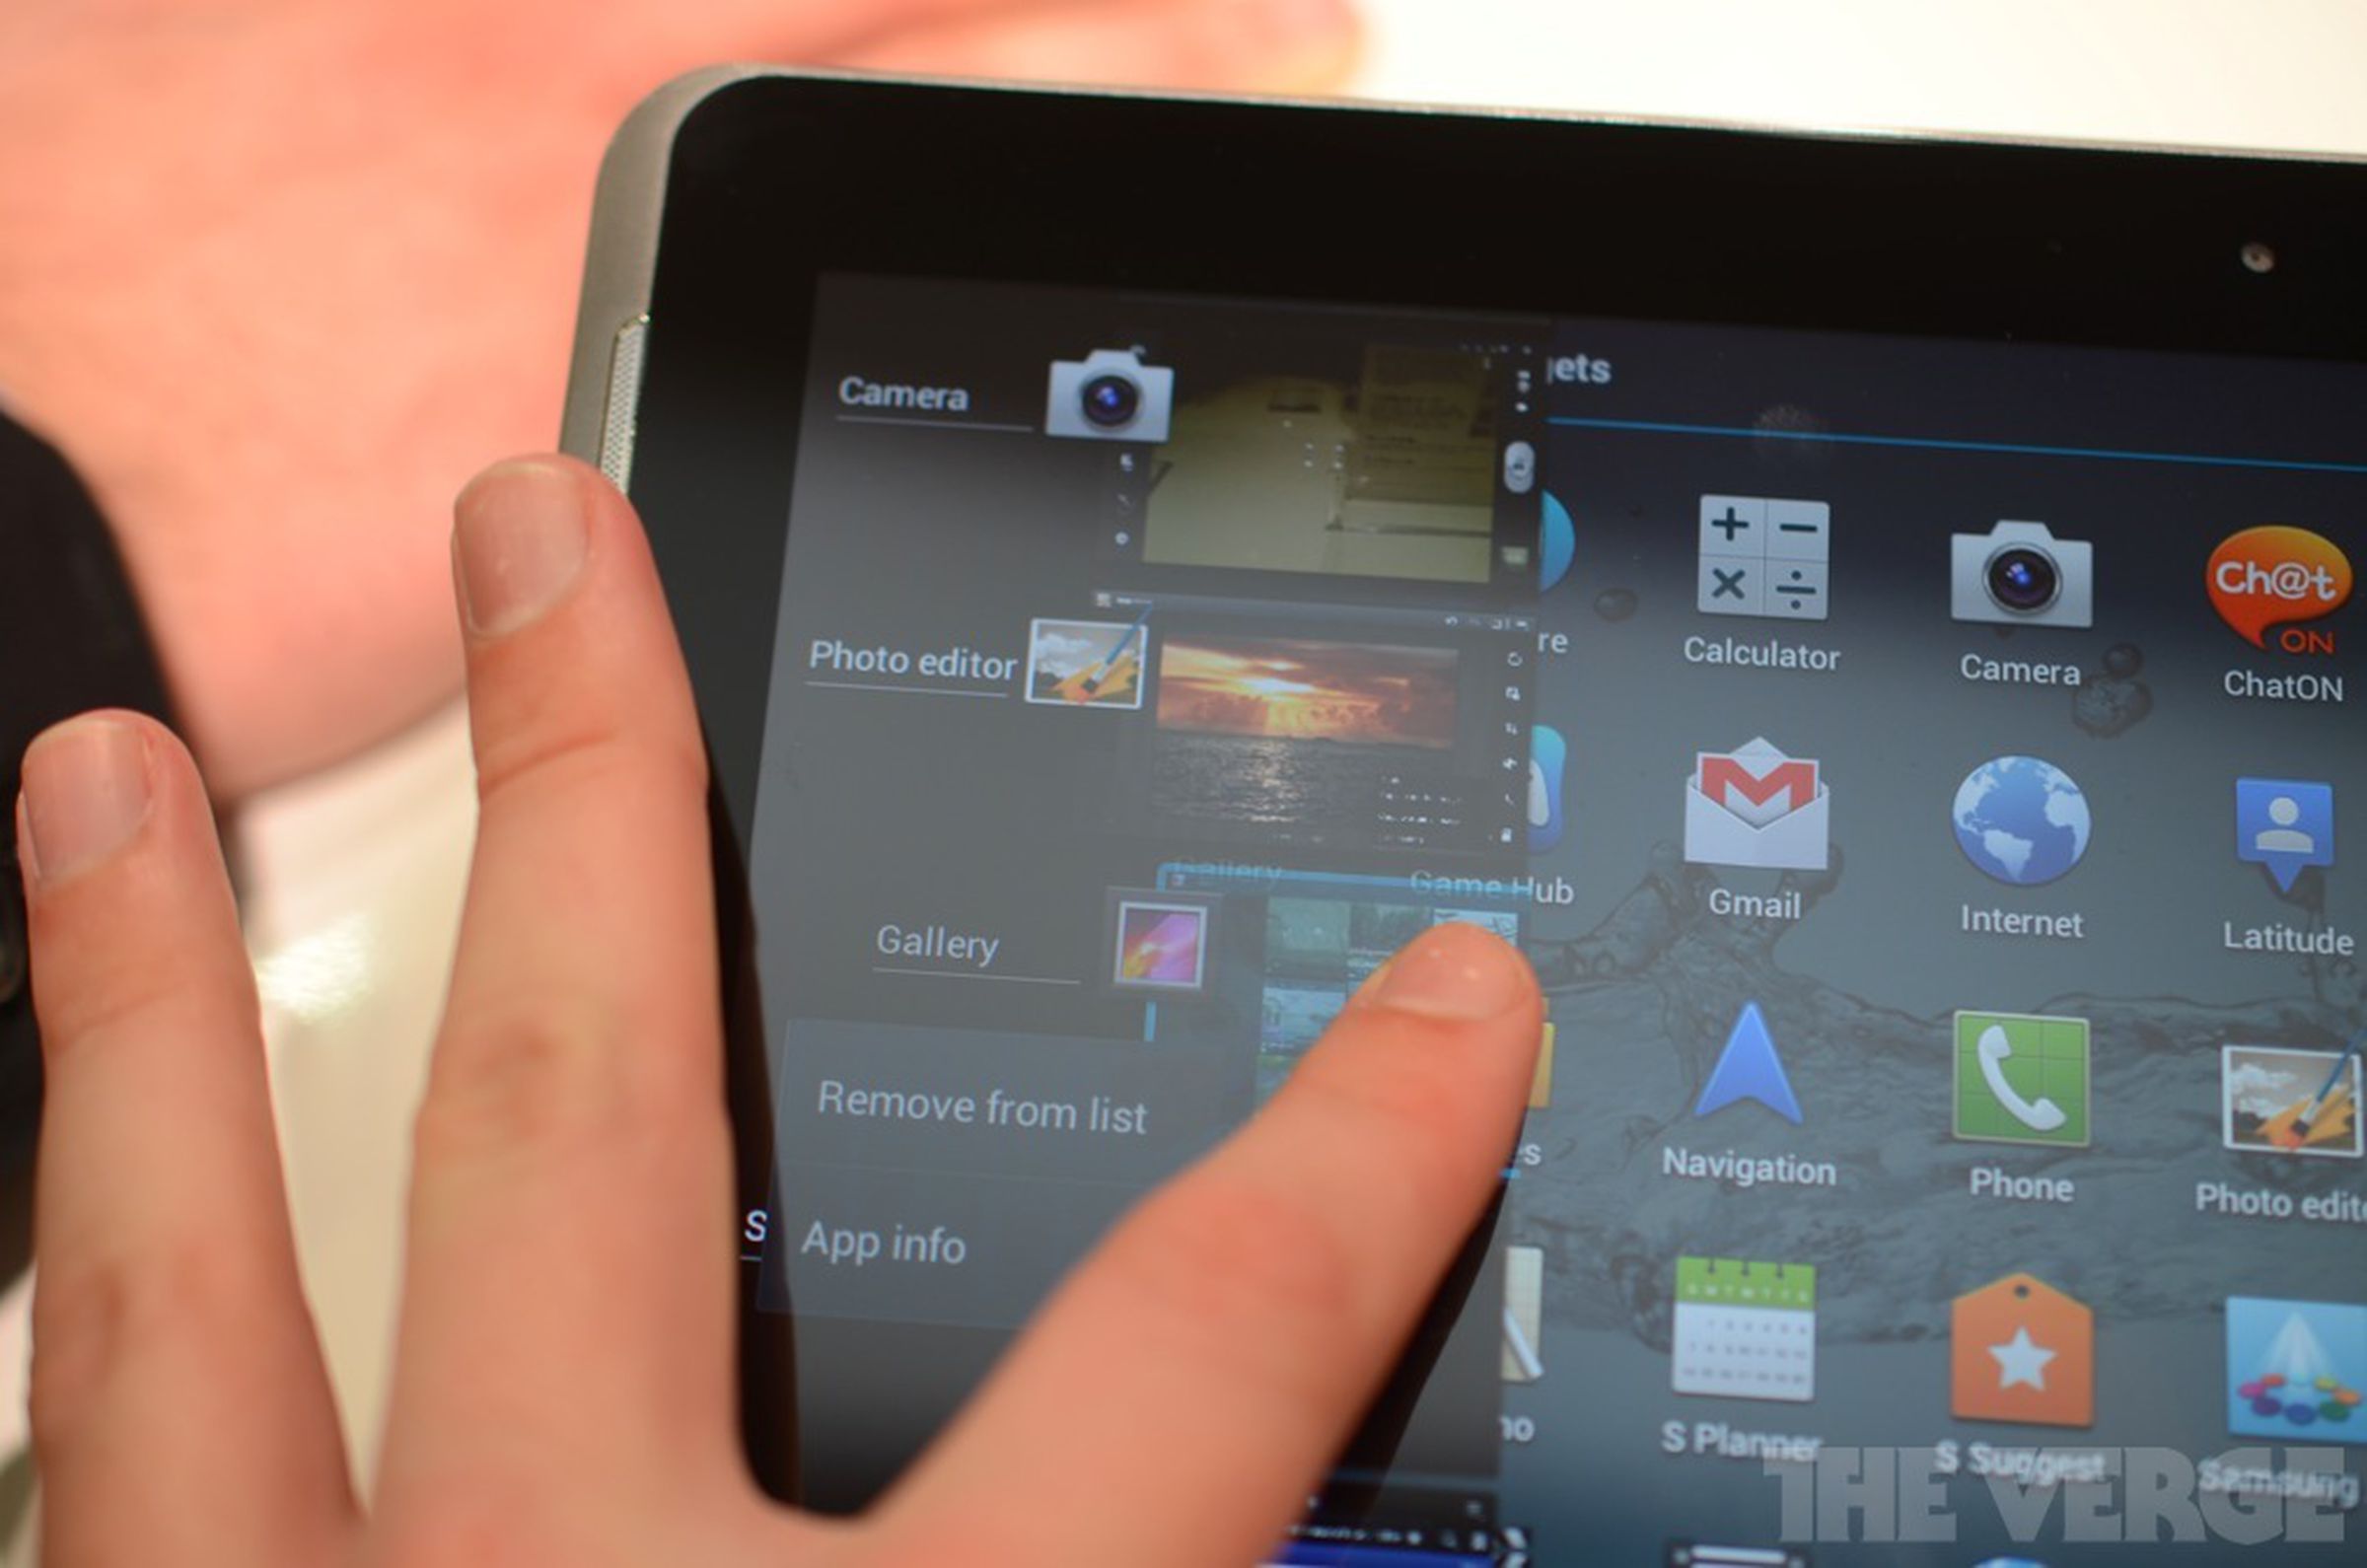 Samsung Galaxy Tab 7.0 and 10.1 hands-on pictures